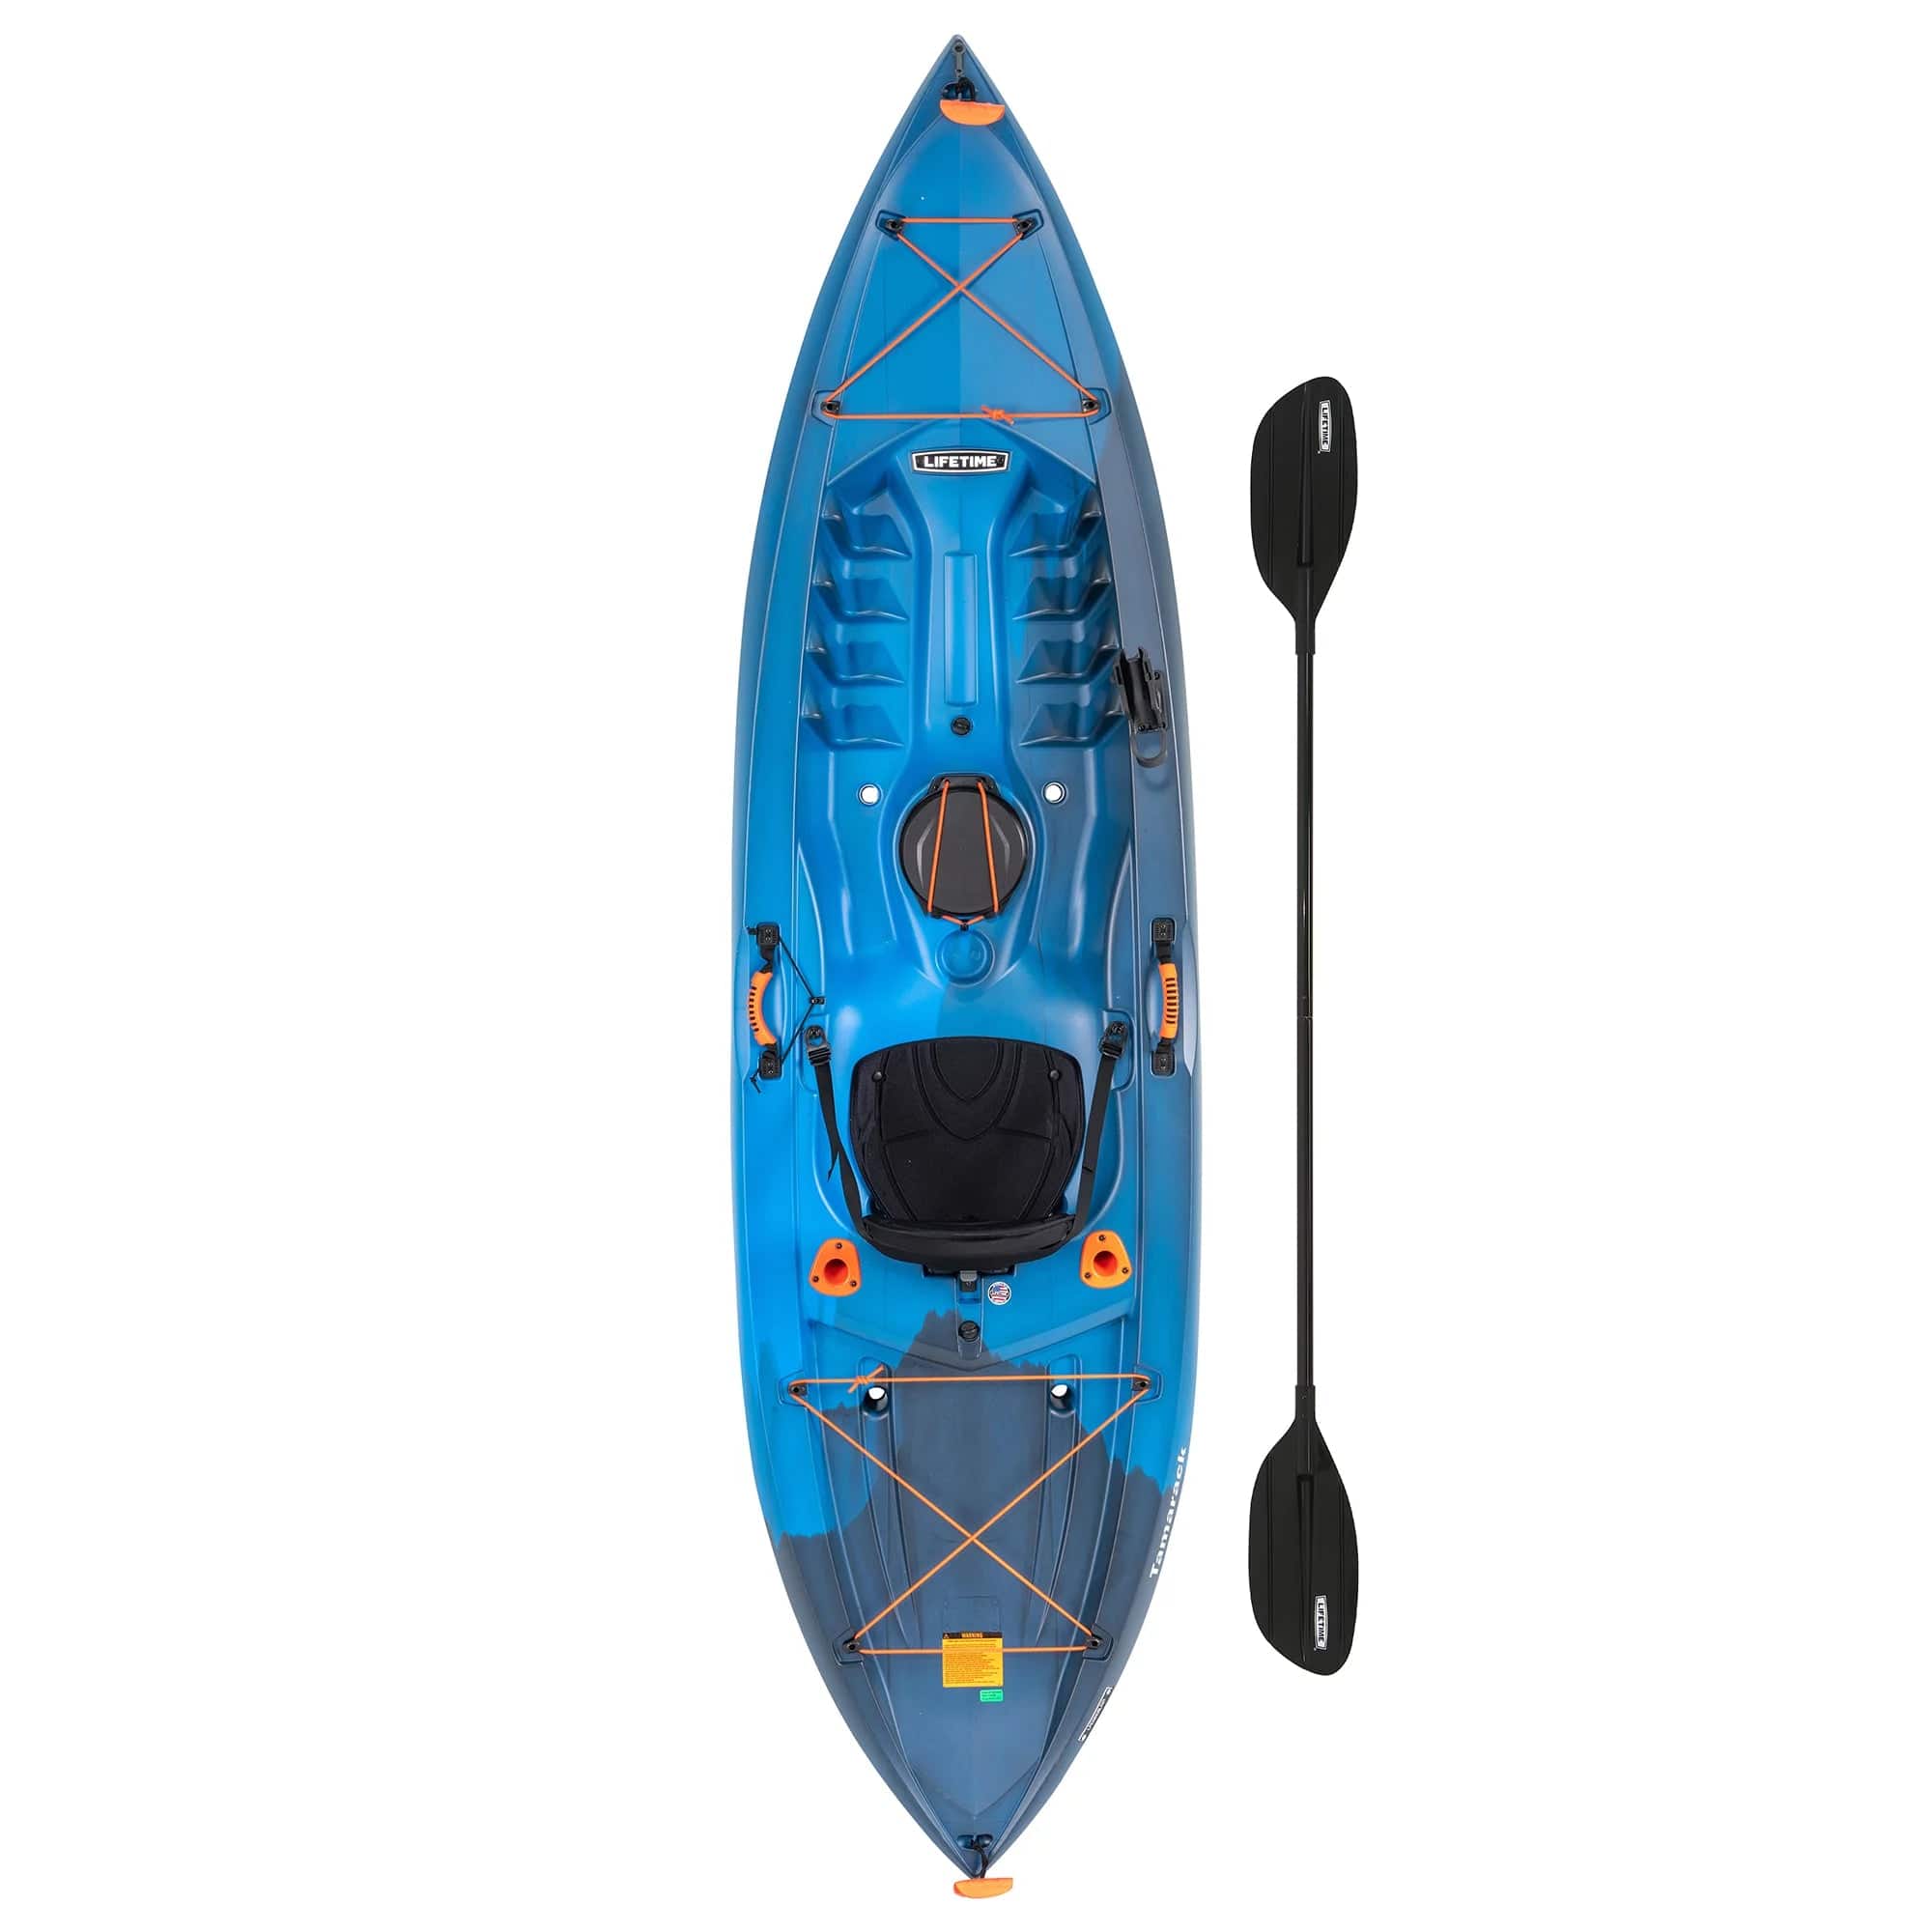 Health & Fitness - Outdoor Activities & Sports - Water Sports - Lifetime  Tamarack 10'' Angler Kayak With Paddle - Online Shopping for Canadians